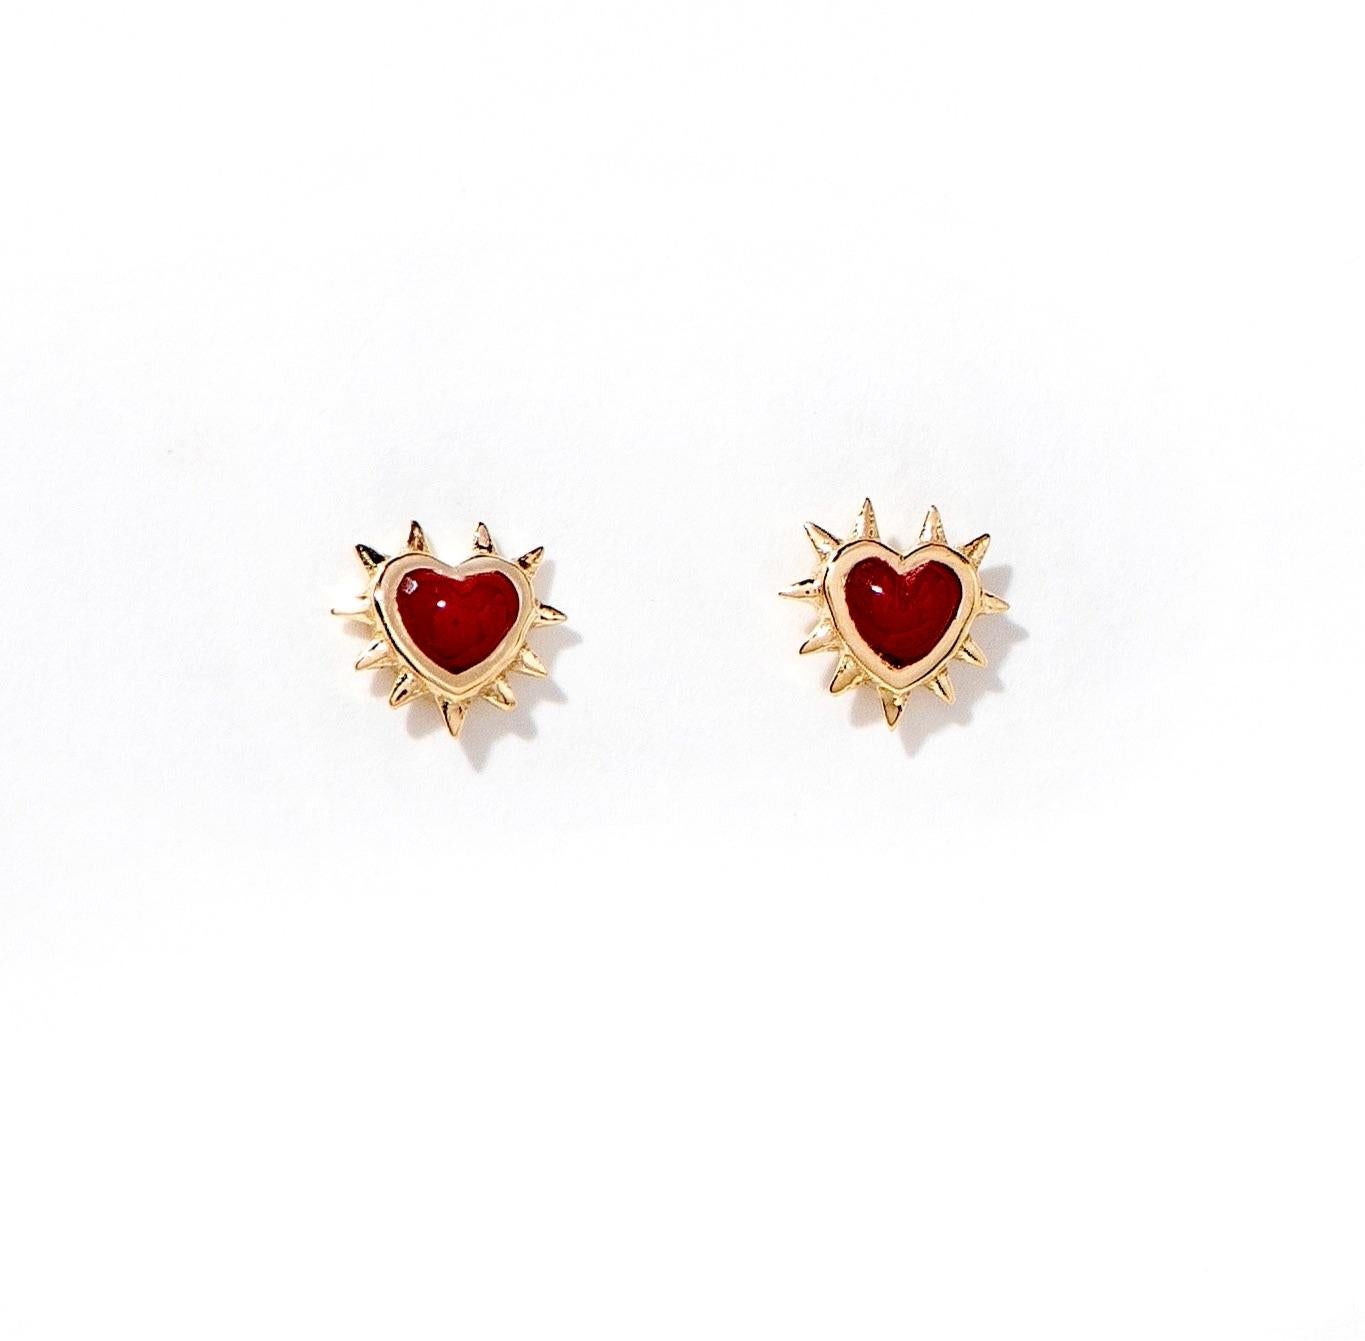 Maria Kotsoni Contemporary 18k Gold Thorny Heart Sculptural Diamond Ear Studs In New Condition For Sale In Nicosia, CY